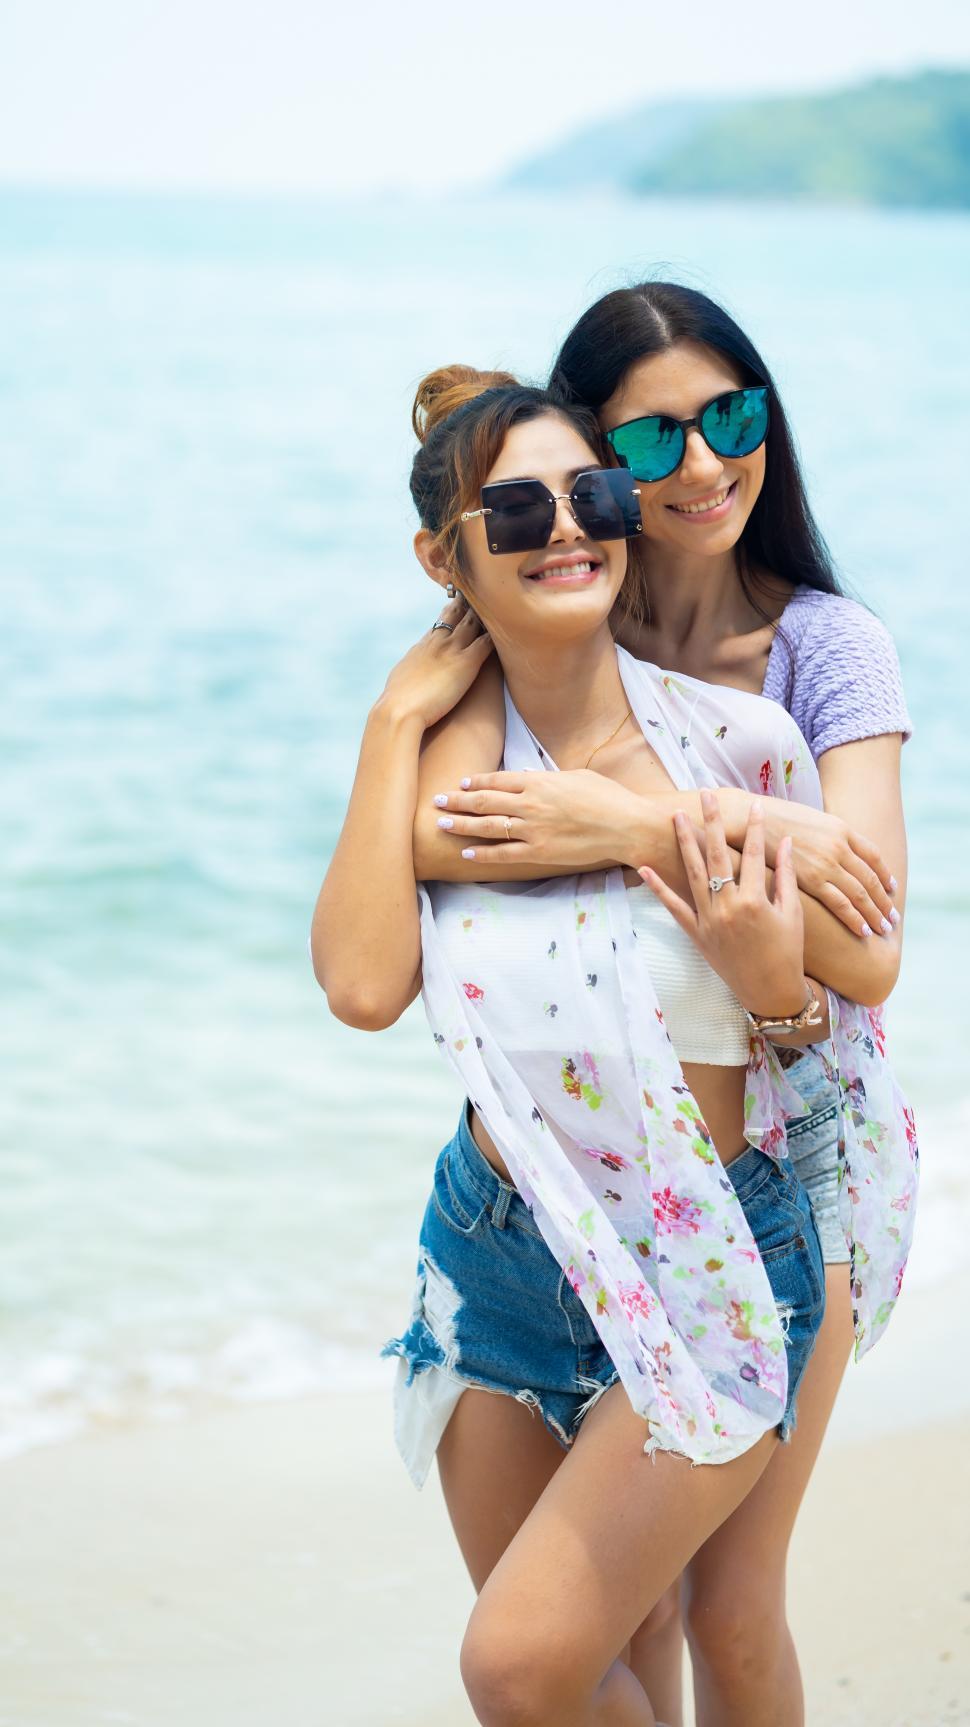 Free Image of Lesbian couple on vacation together, embracing on the beach 